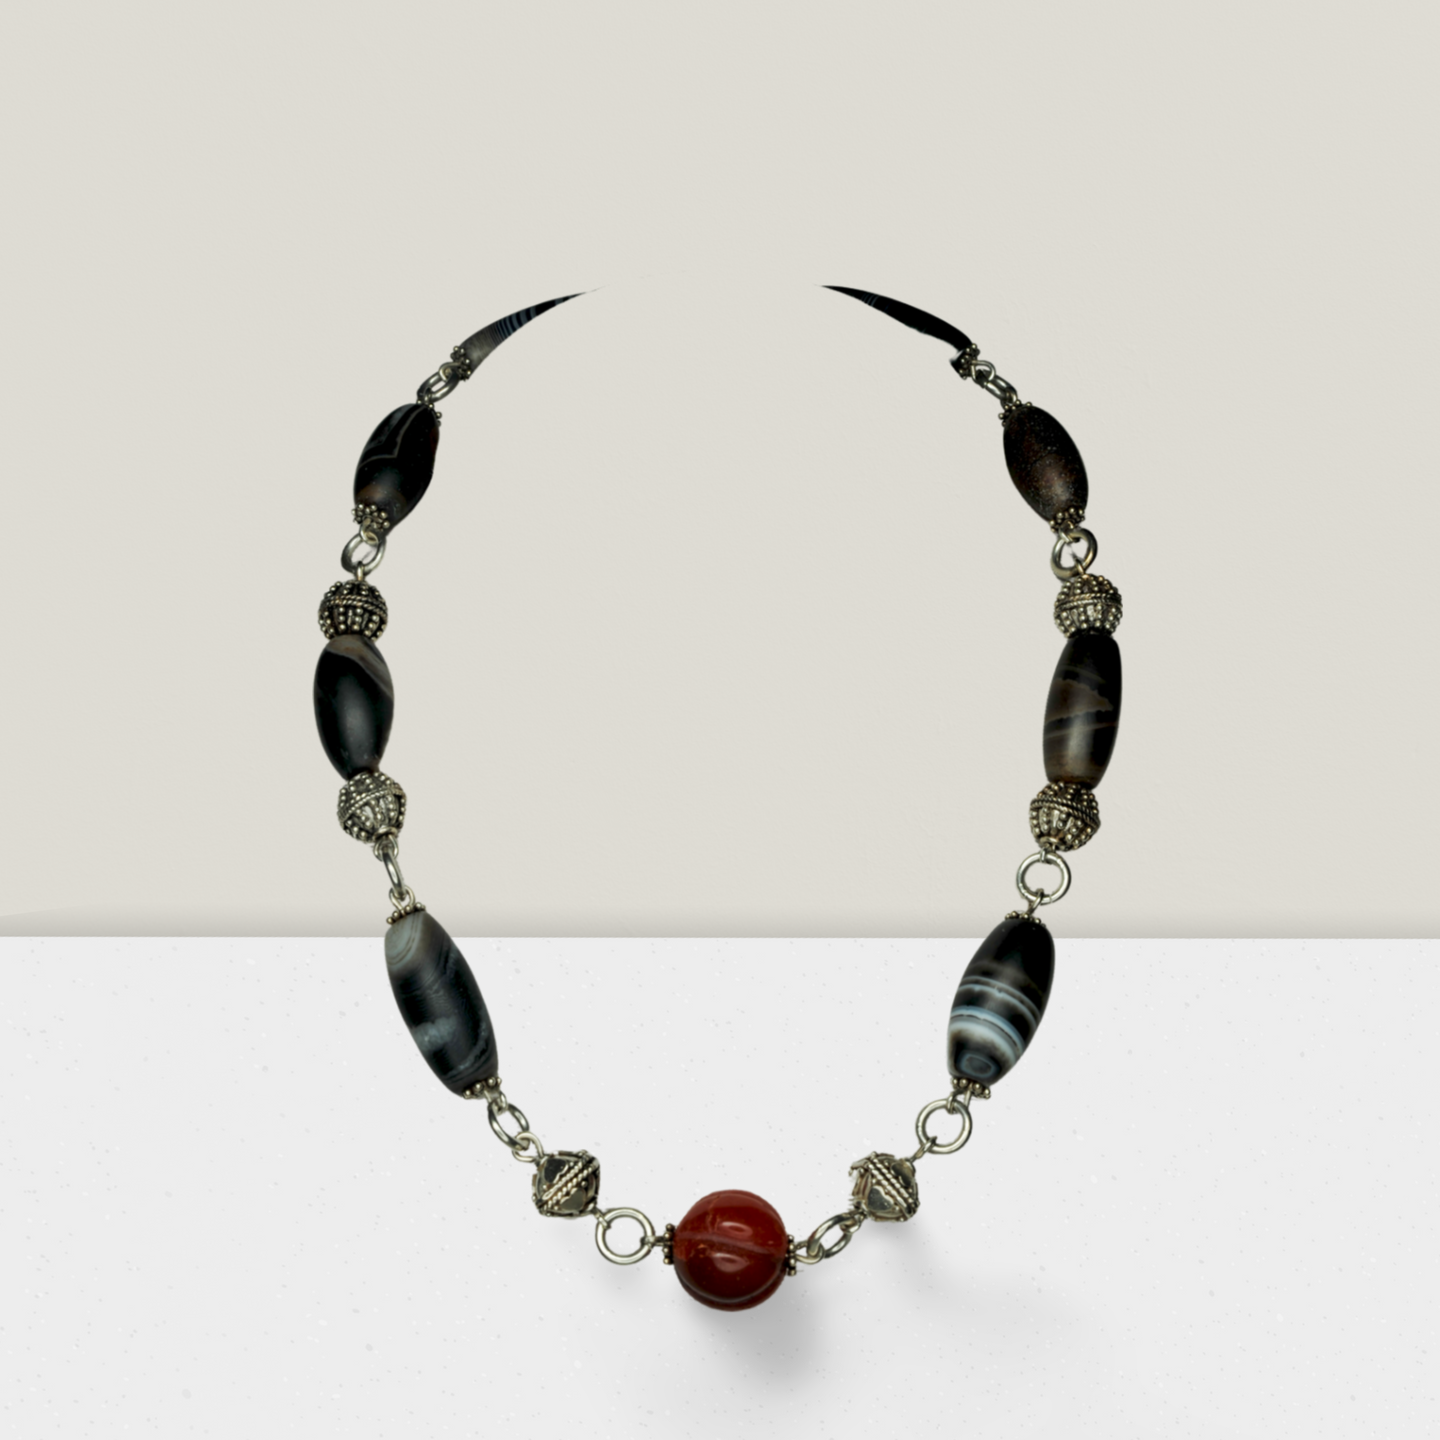 Necklace in Sterling Silver with Carnelian and Old Sardonyx